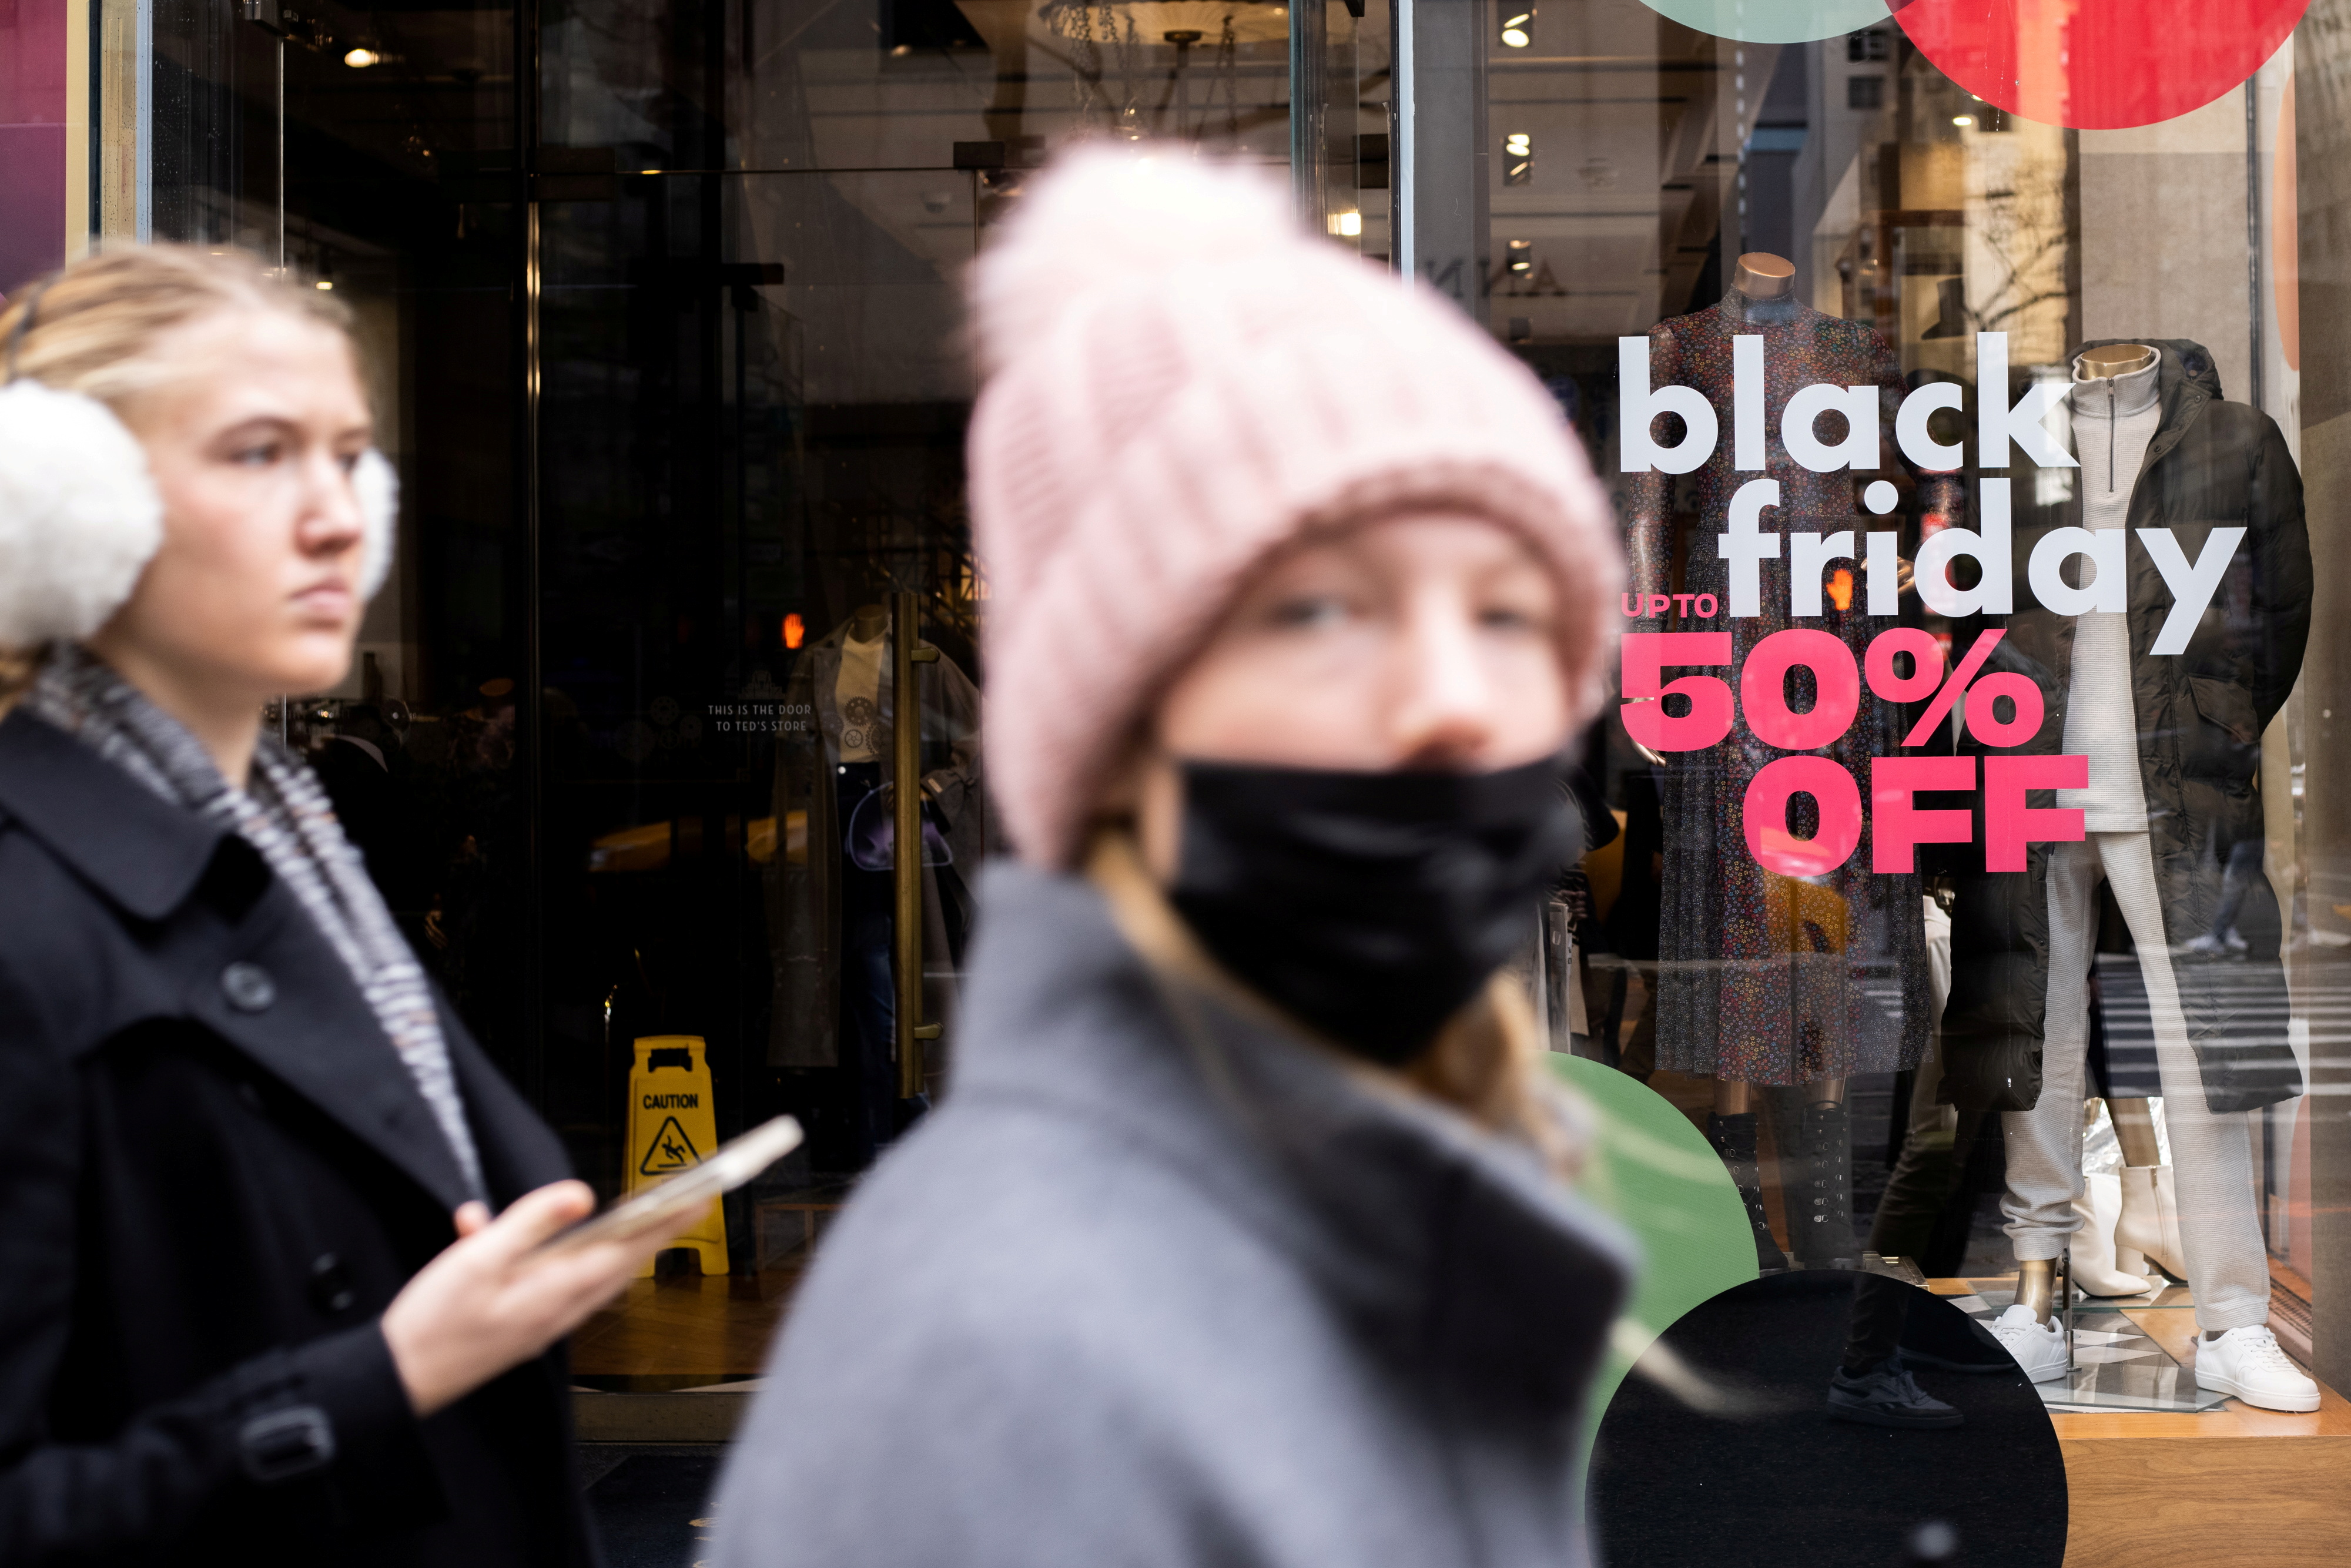 People walk along a store with sales signage during Black Friday sales in the Manhattan borough of New York City, New York, U.S., November 26, 2021. REUTERS/Jeenah Moon